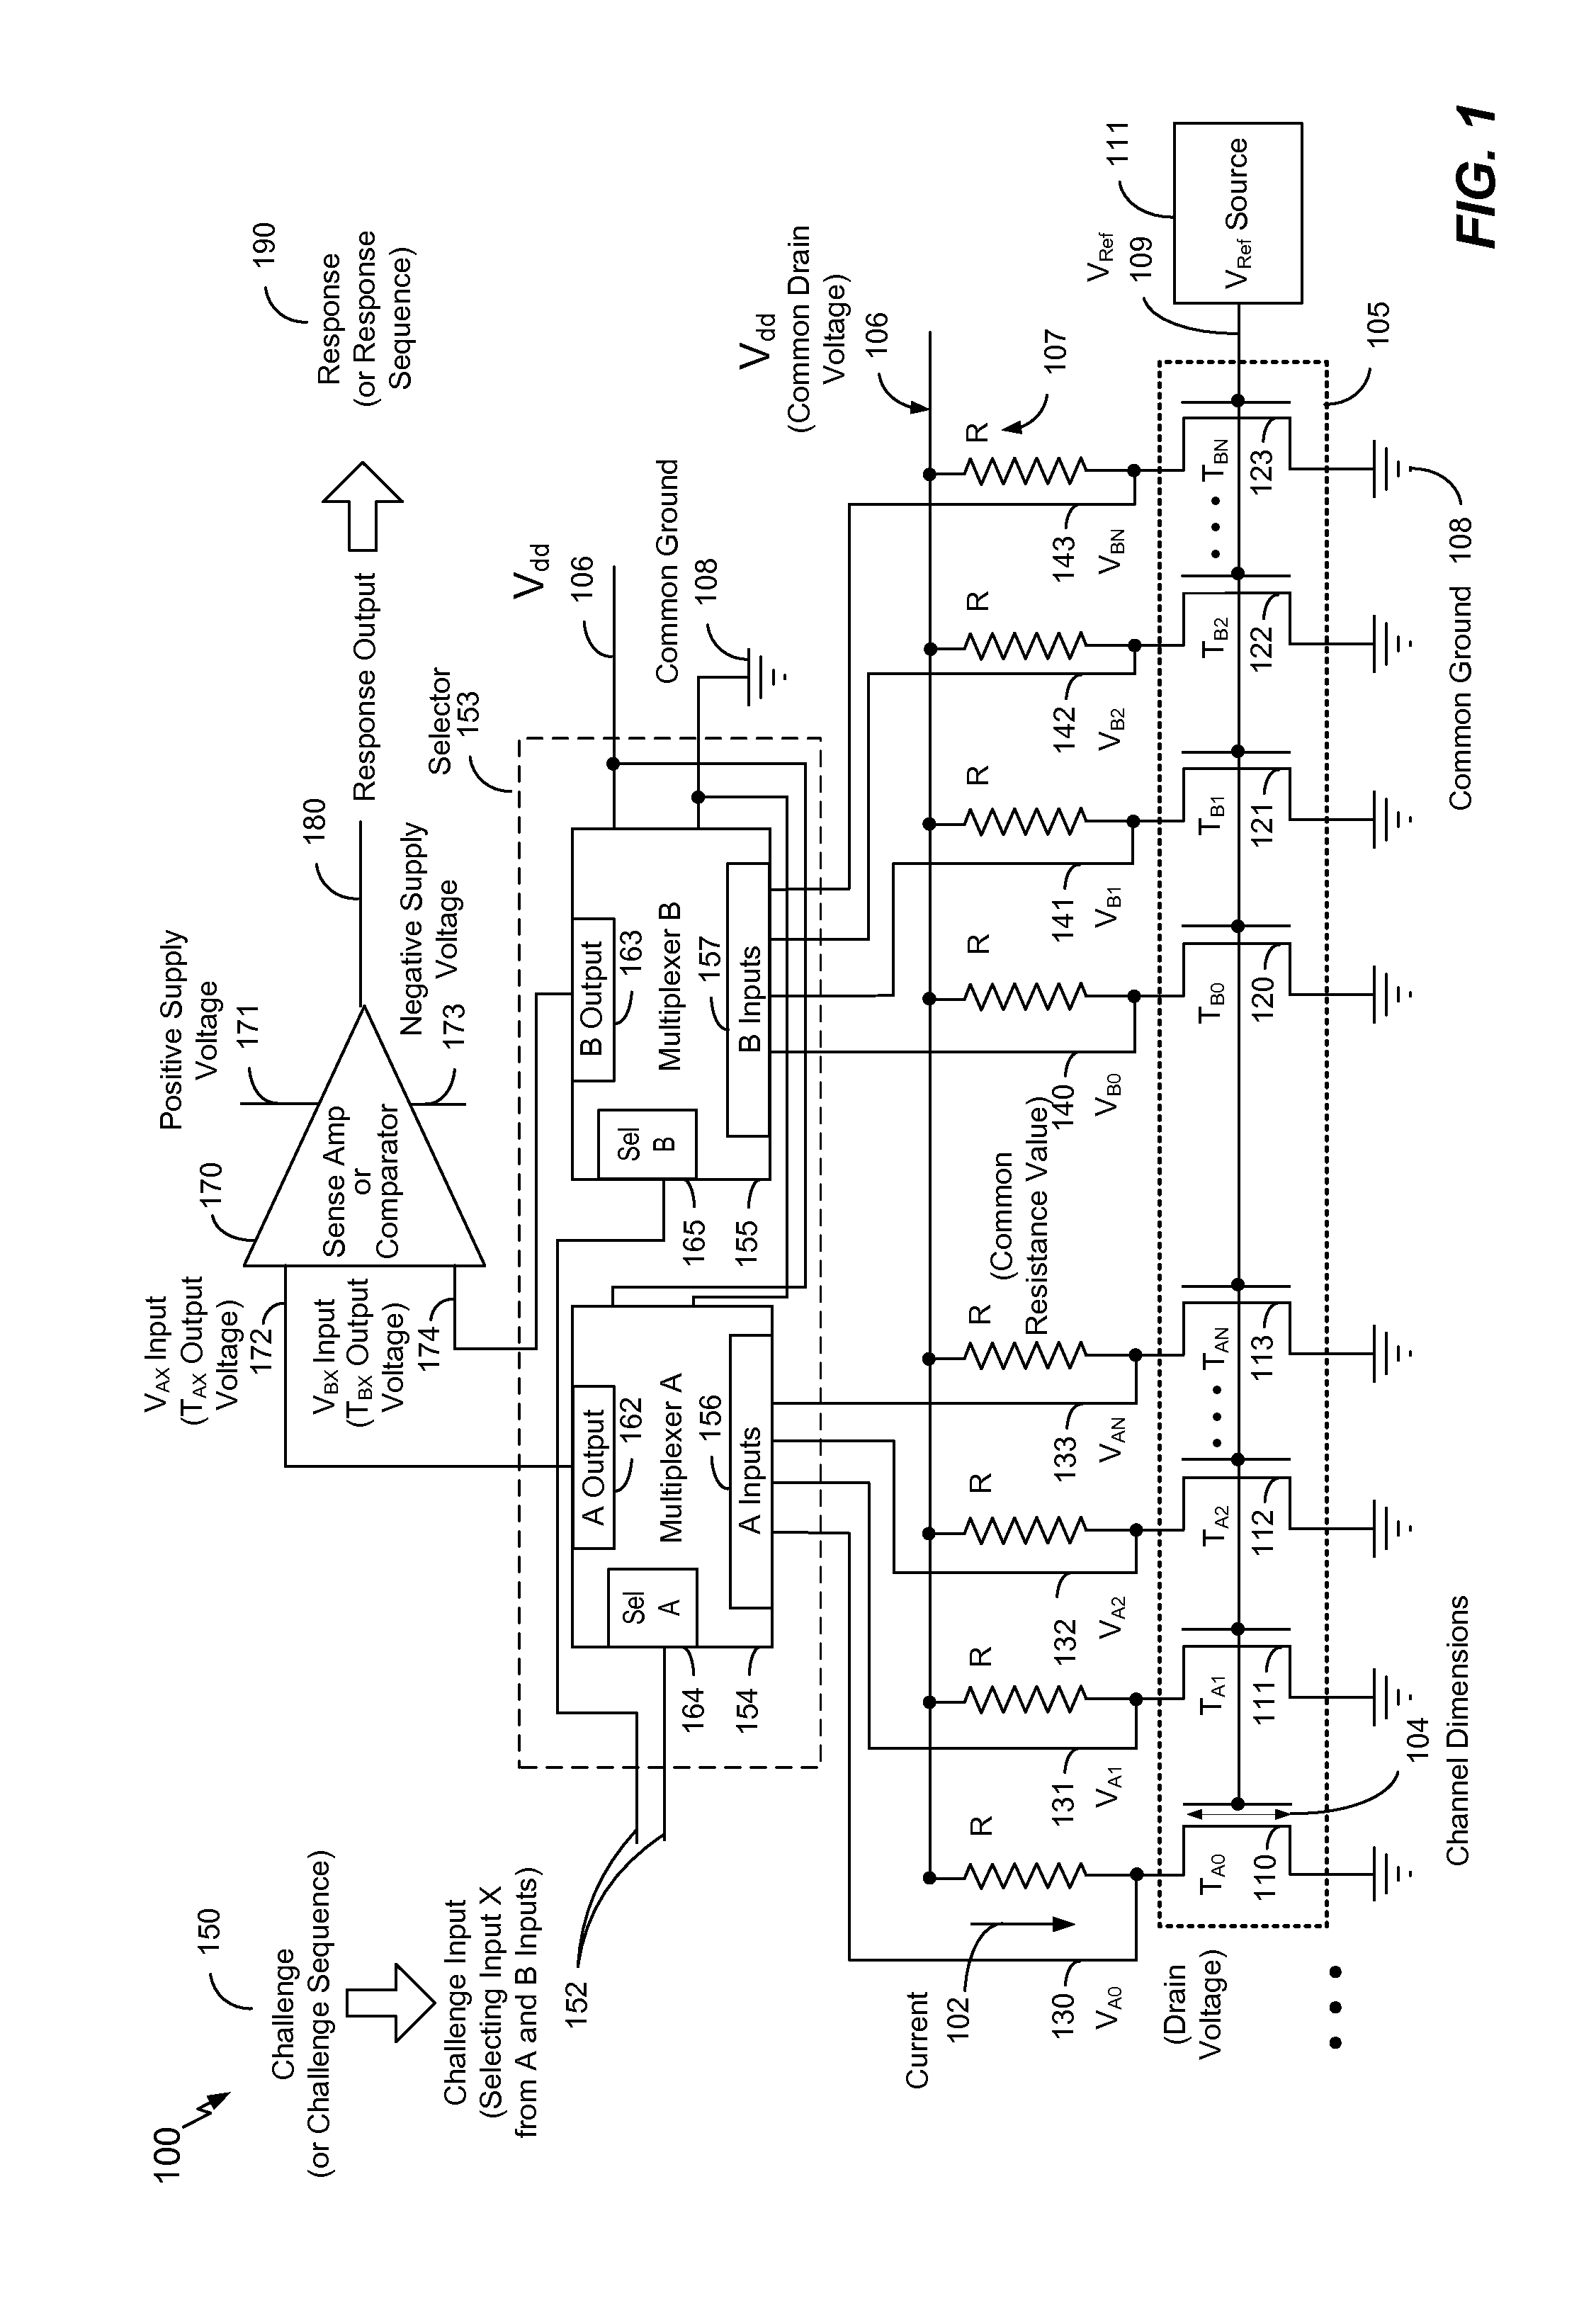 Physically Unclonable Function Implemented Through Threshold Voltage Comparison